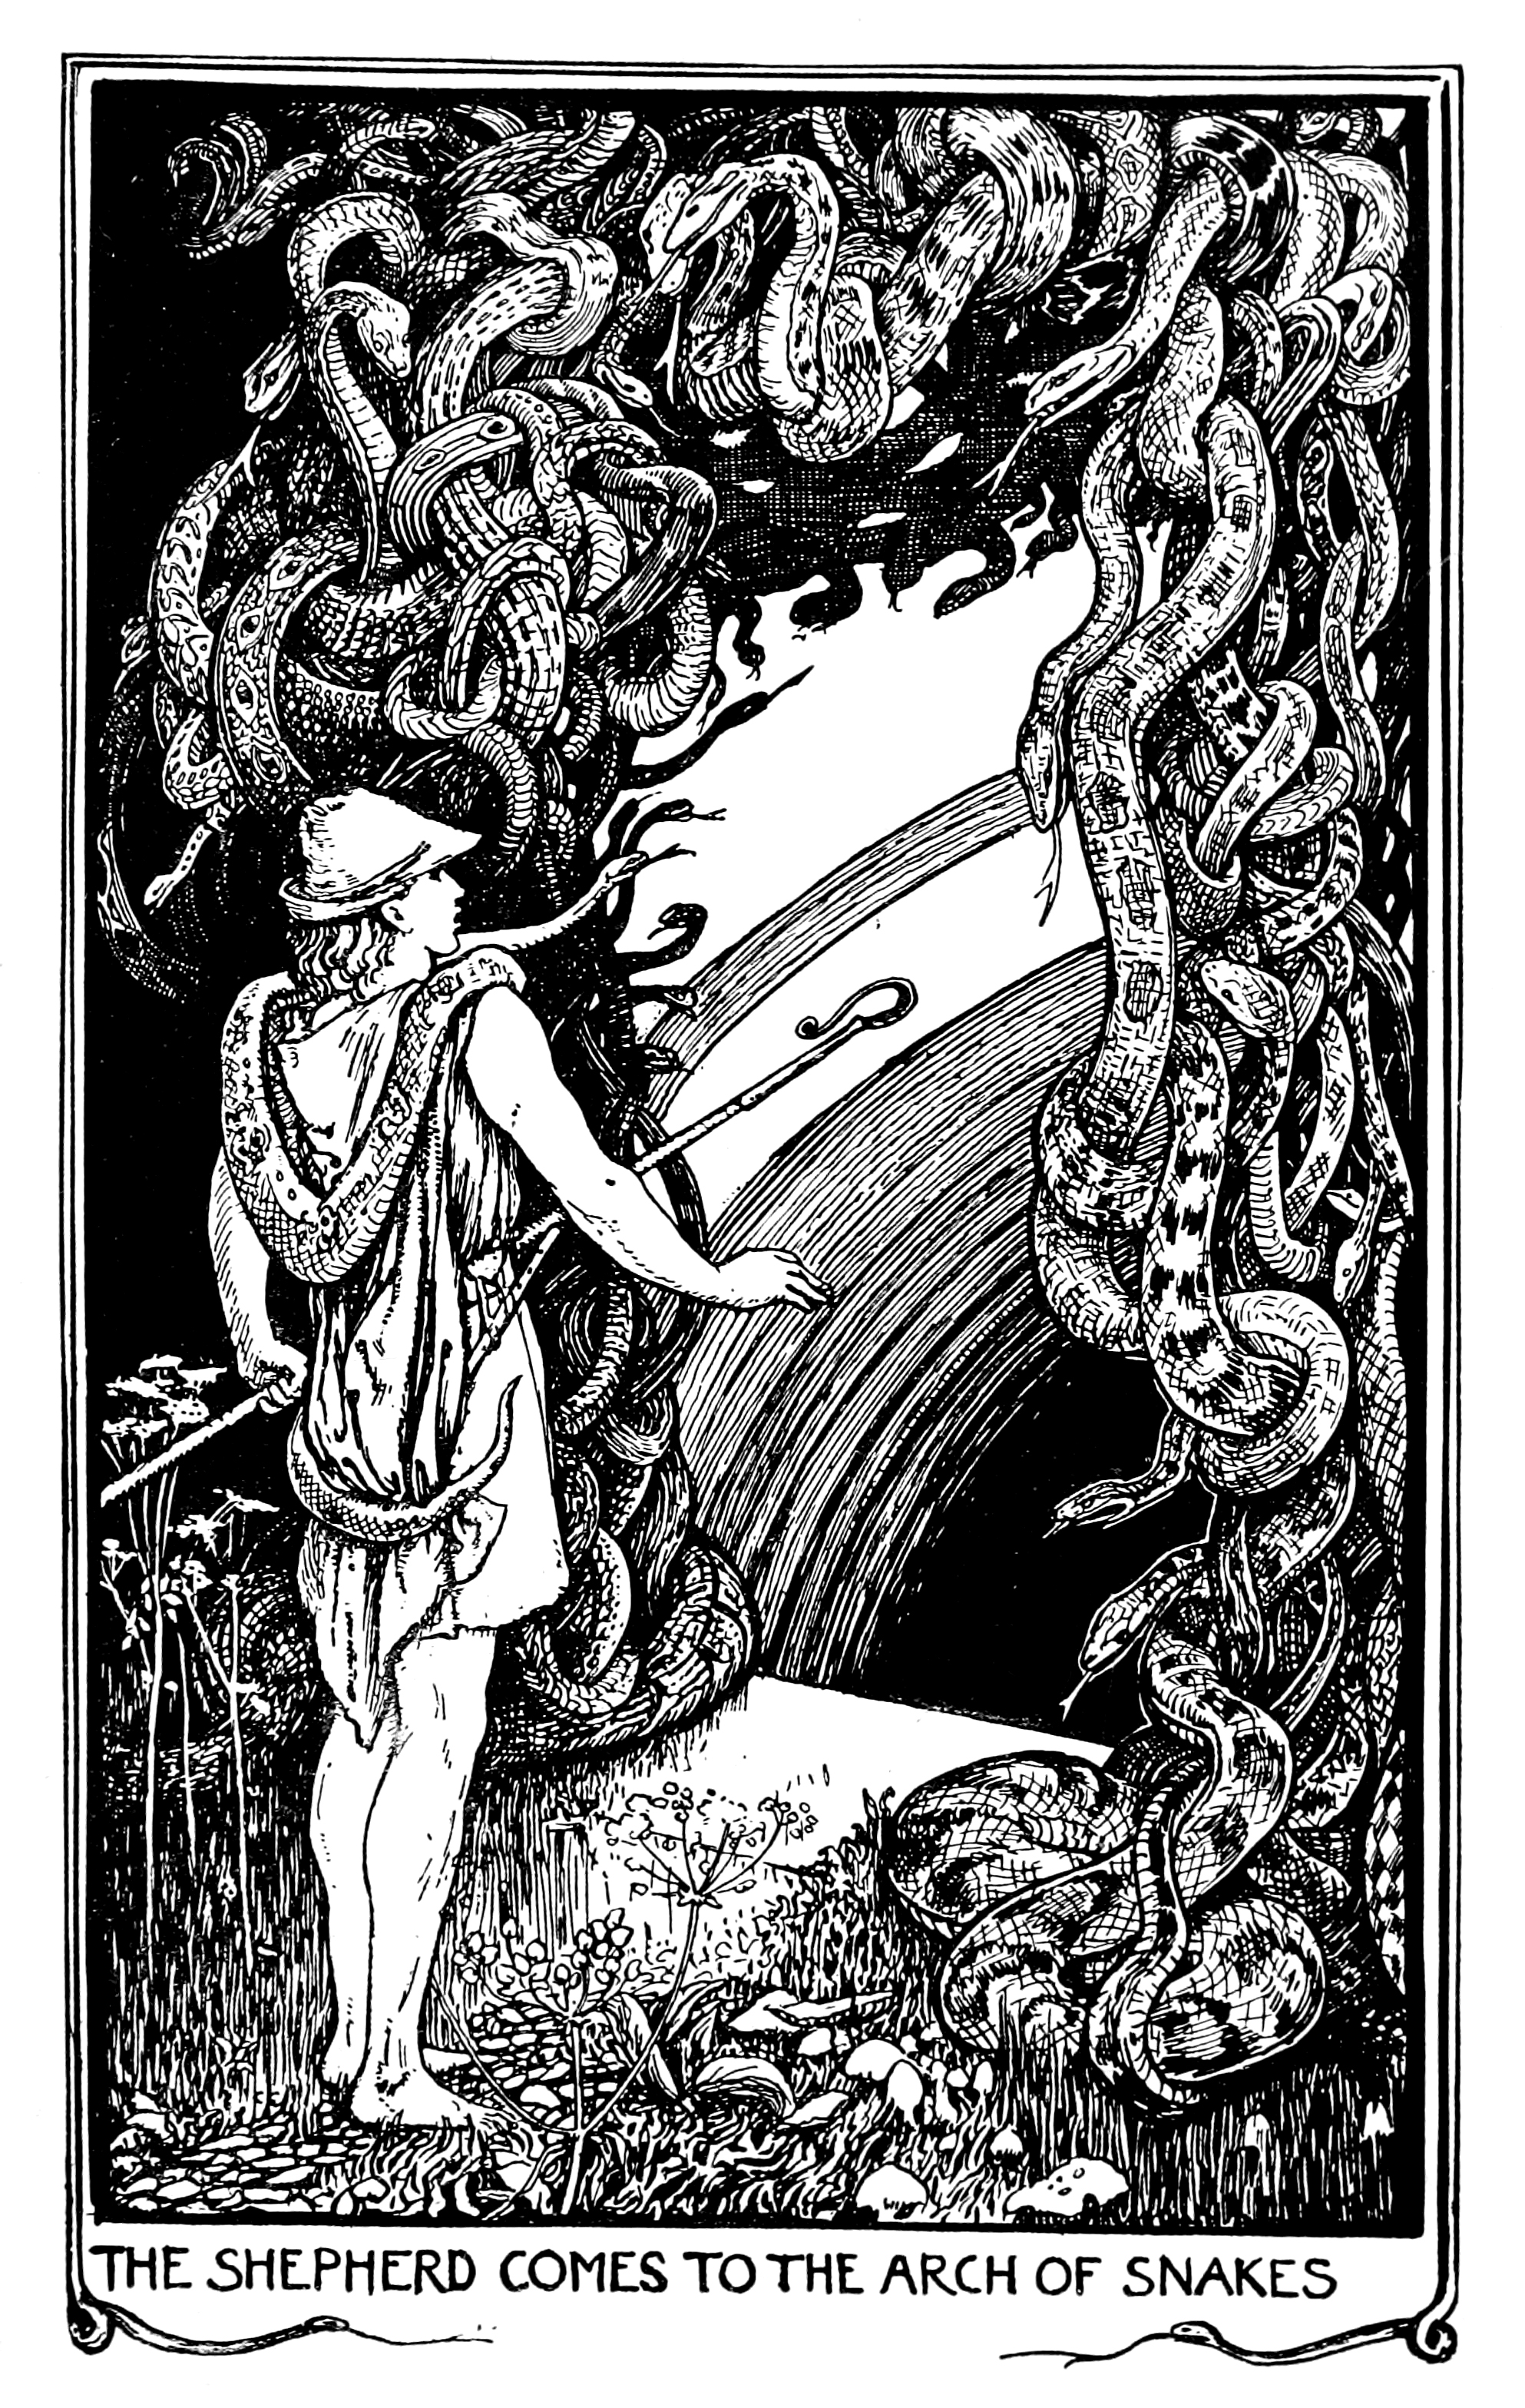 Henry Justice Ford - The crimson fairy book, edited by Andrew Lang, 1903 (illustration 3)